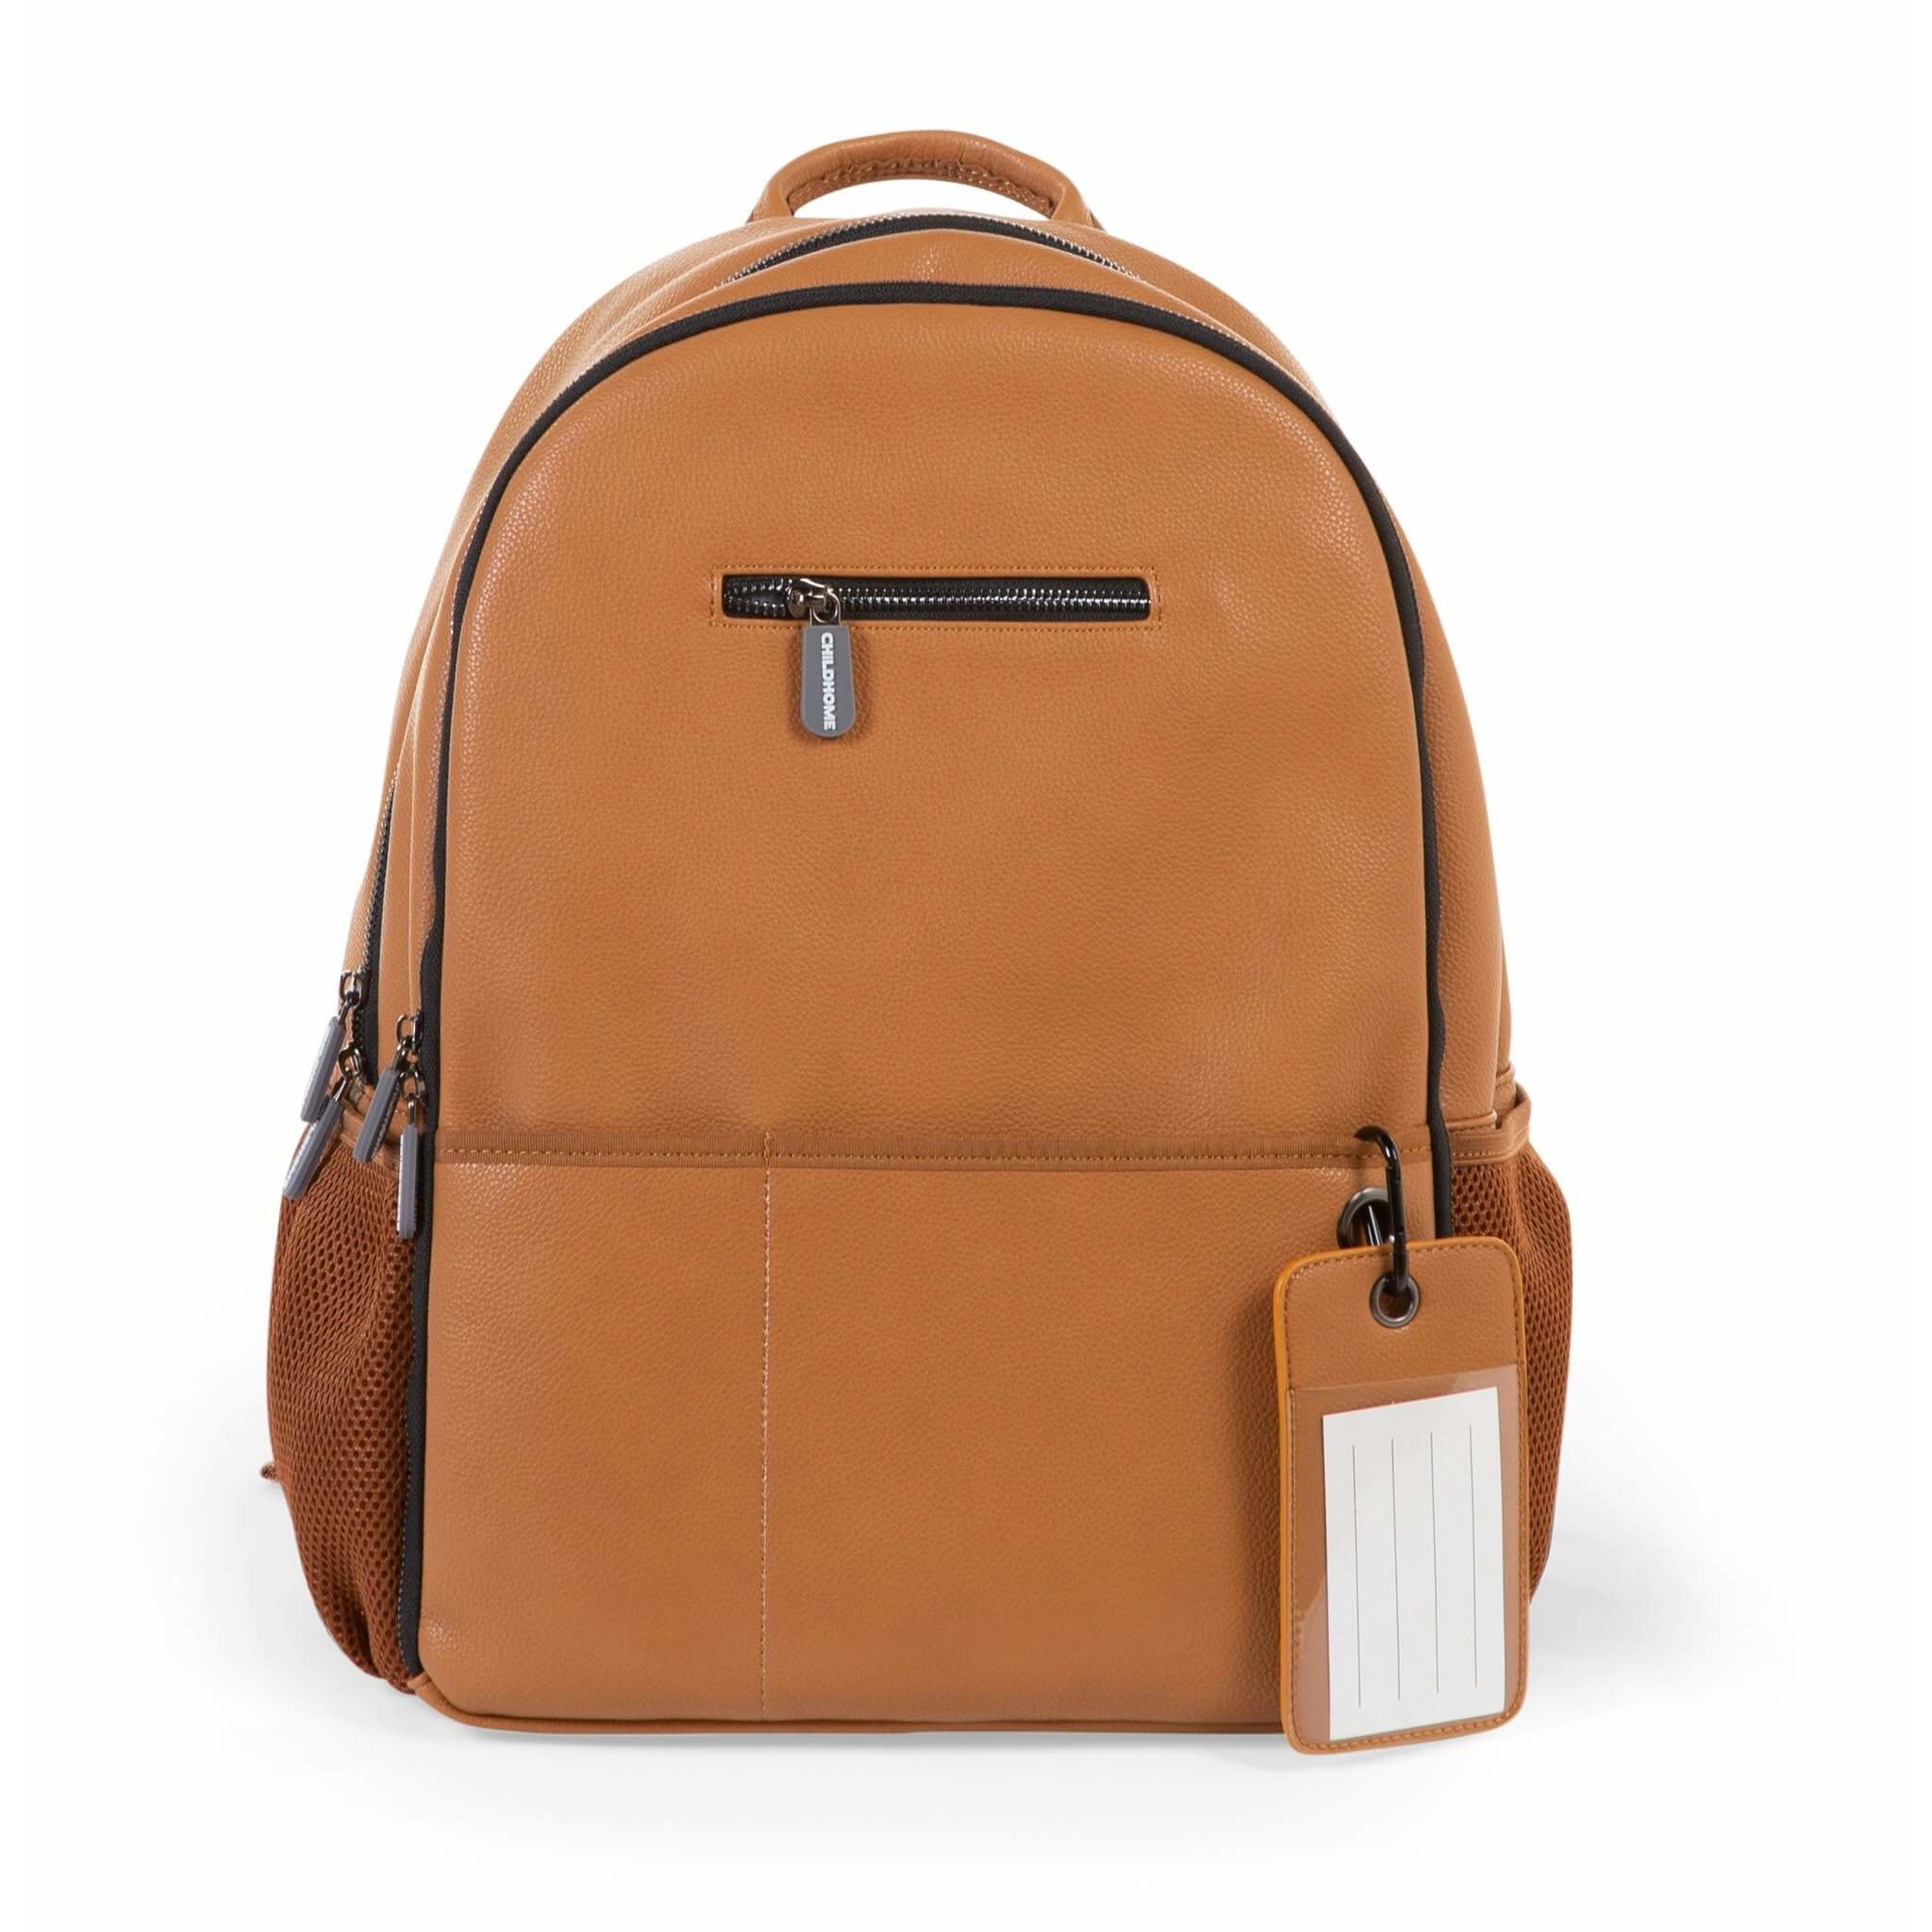 ChildHome Leatherlook Backpack - Brown